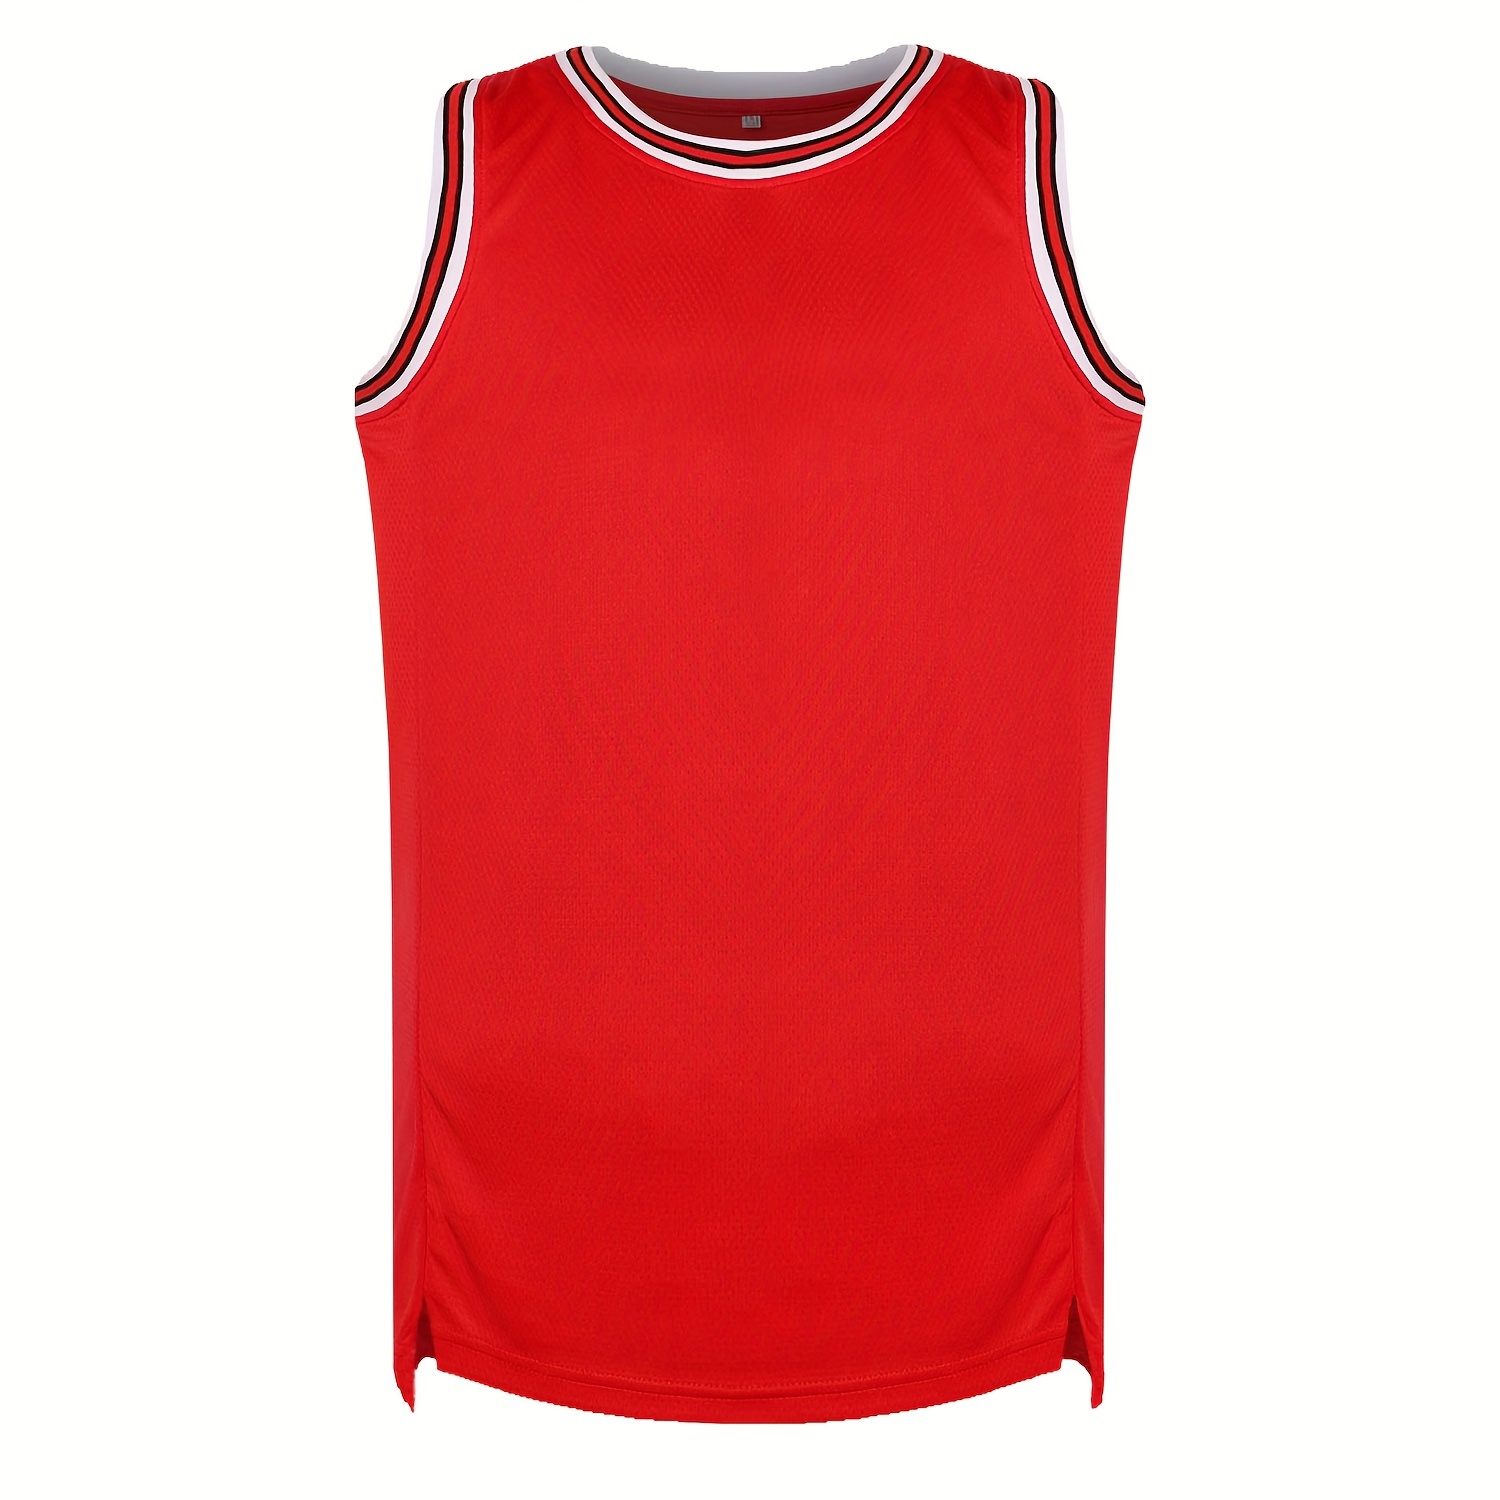 Men's O'cet #30 Basketball Jersey, Retro Embroidery Breathable Sports  Uniform, Sleeveless Basketball Shirt For Training Competition Party Costume  Gift - Temu